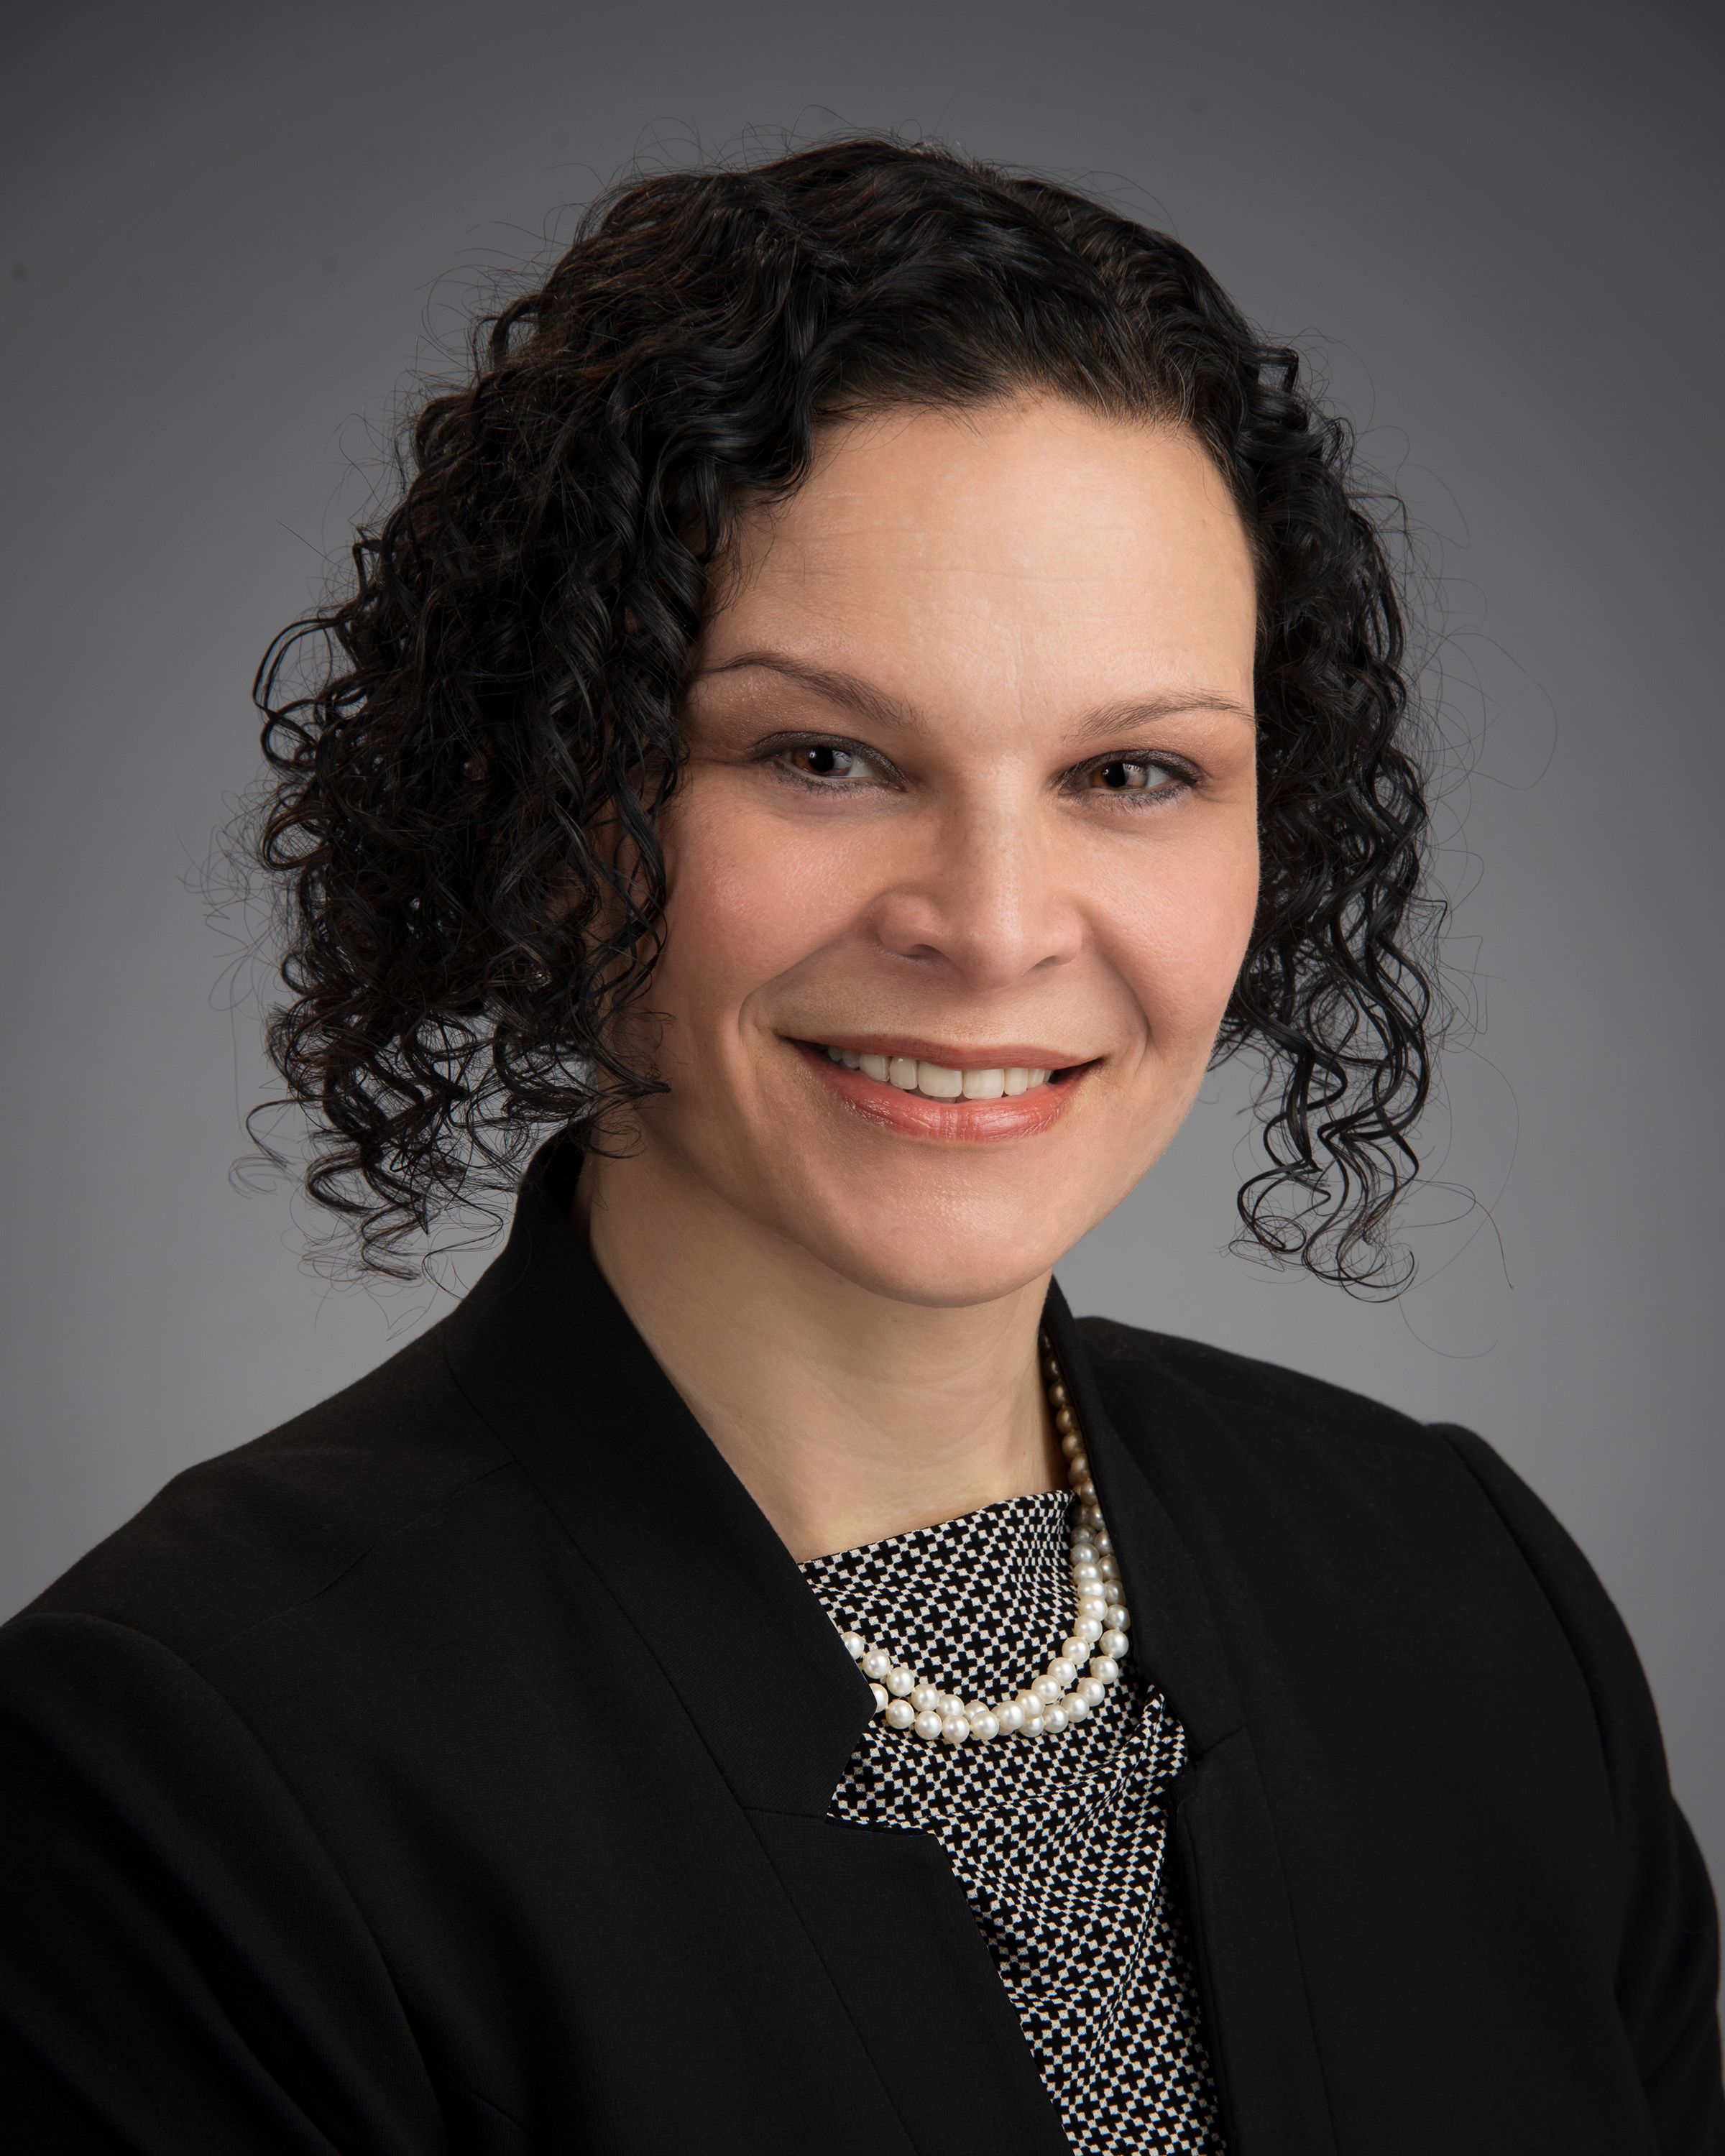 Rachel Thornton, Nemours Children’s Health's first vice president and enterprise chief health equity officer